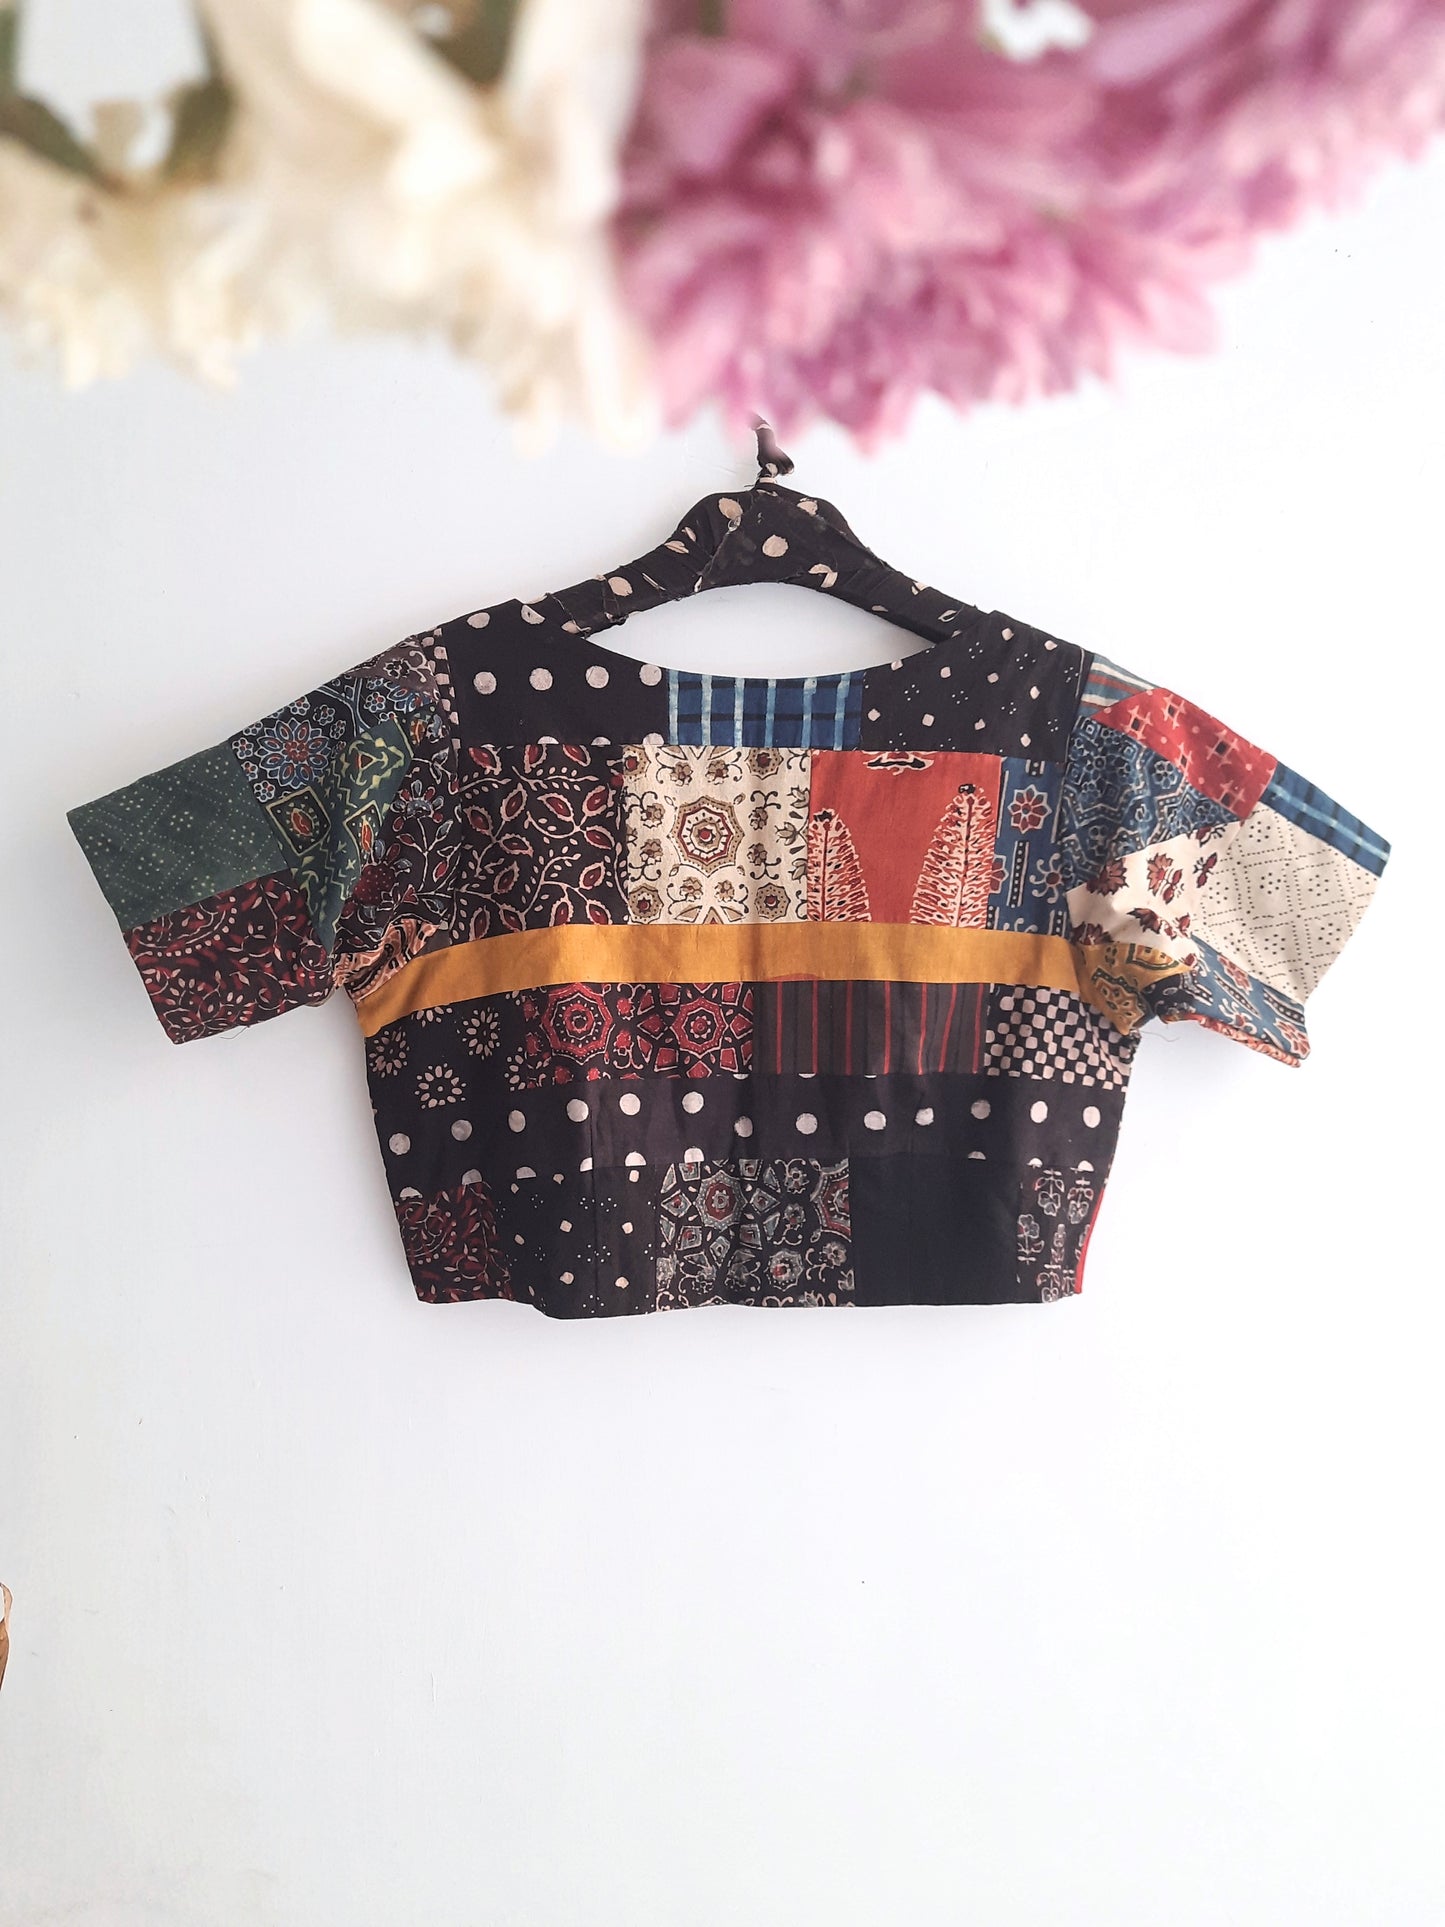 Captivating Multi-Ajrakh Hand Block Prints Patchwork Blouse from Turquoisethestore. Pure cotton, vibrant natural dyes – a sustainable fashion statement merging tradition and style for your eco-conscious wardrobe.